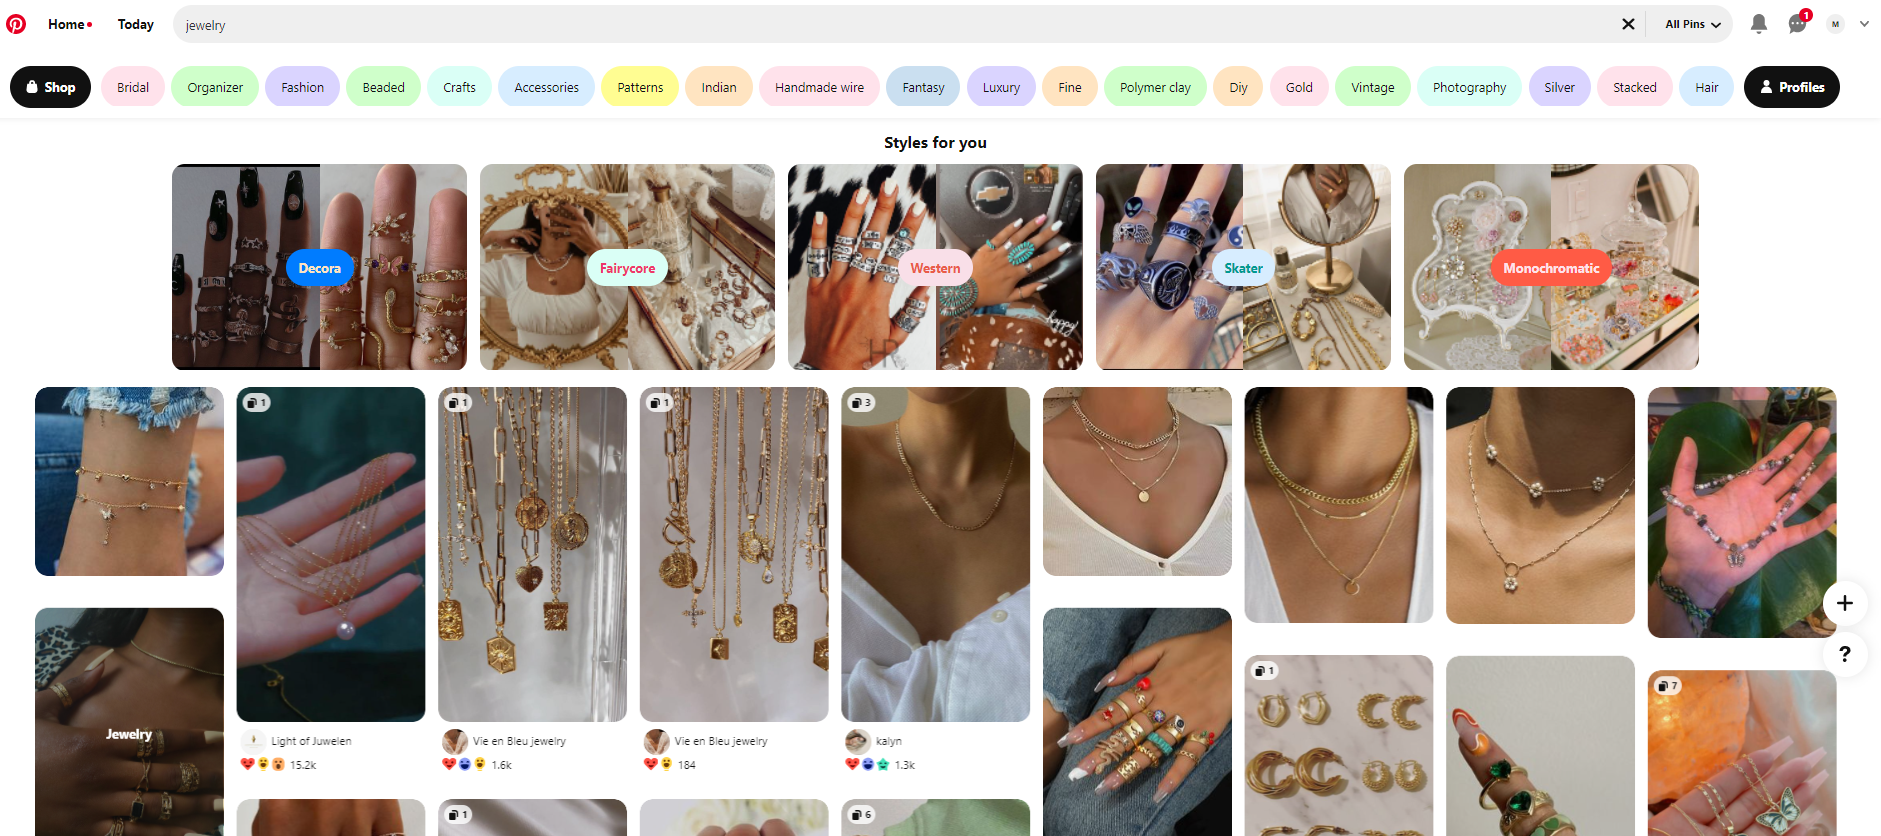 finding jewelry inspiration